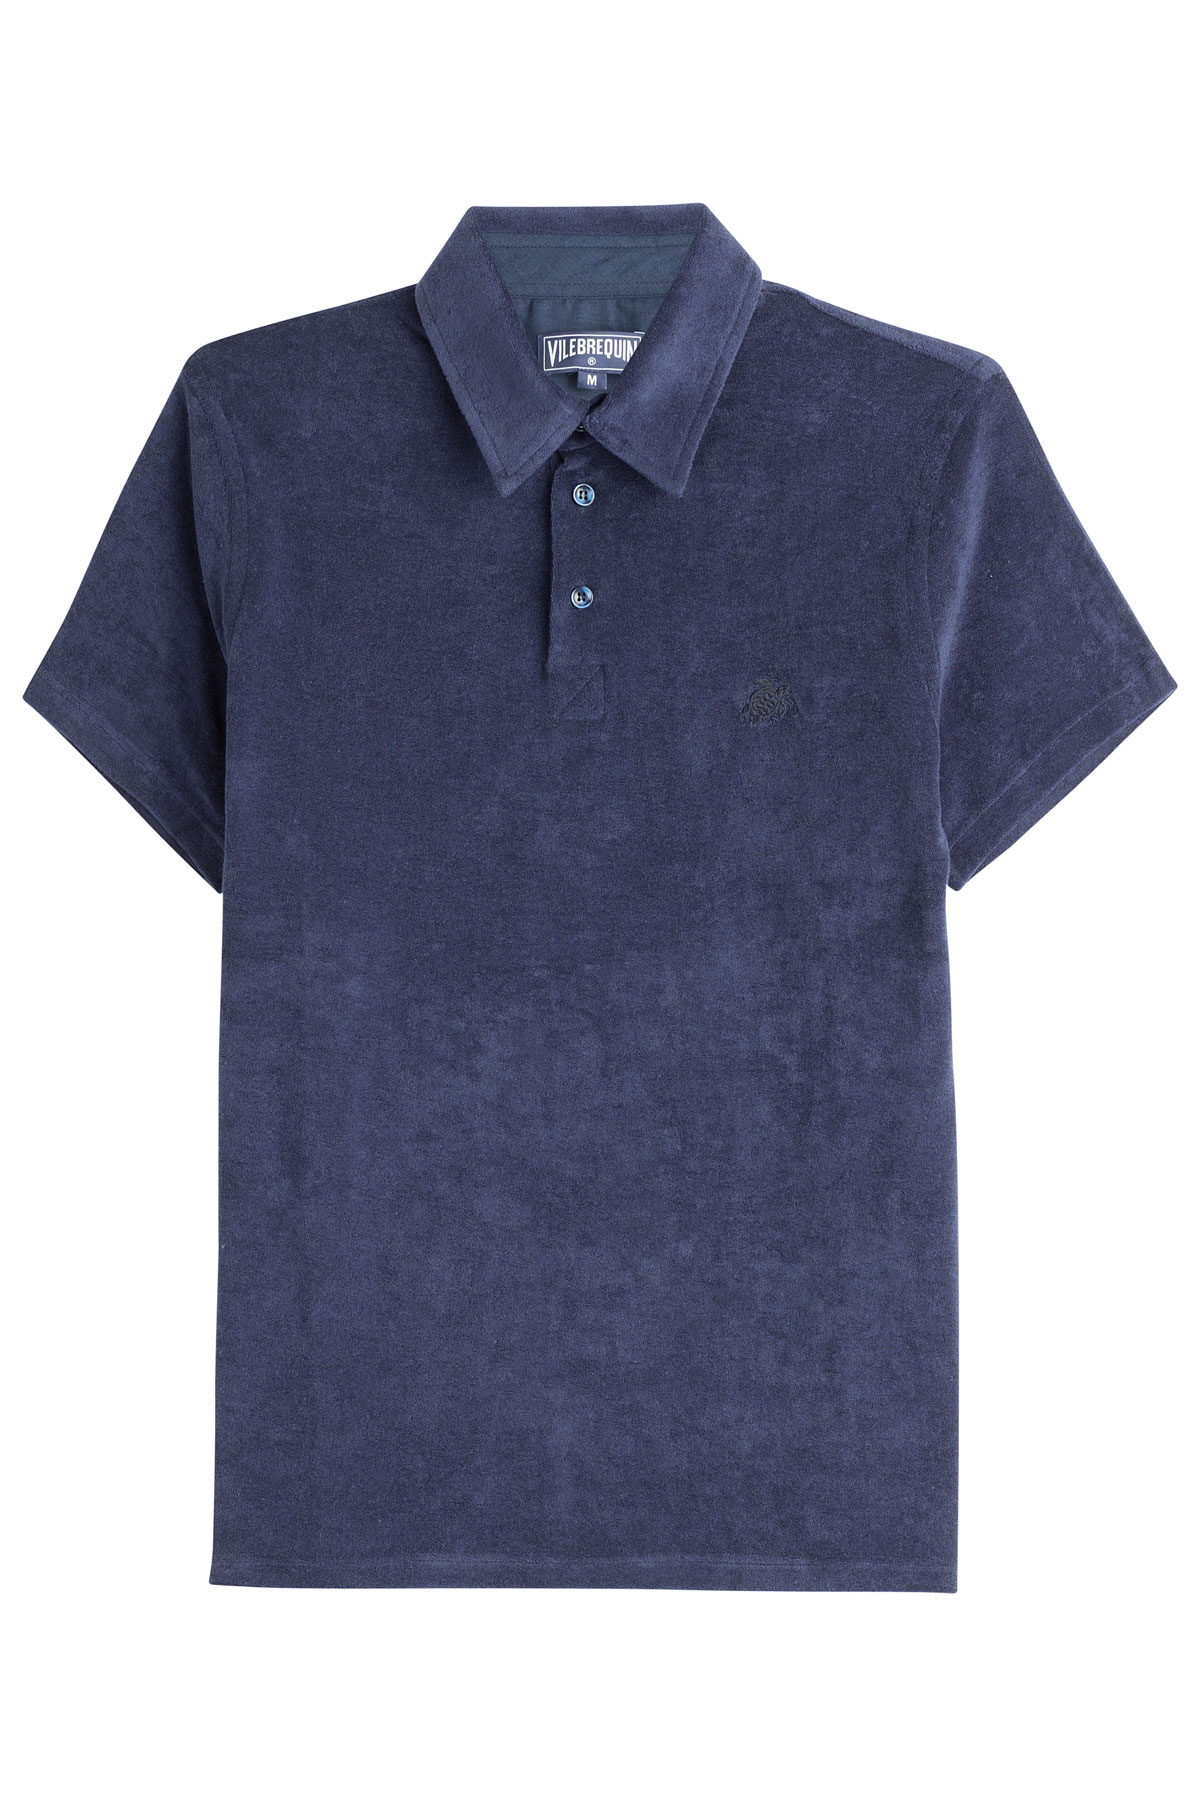 Lyst - Vilebrequin Terry Cotton Polo Shirt in Blue for Men